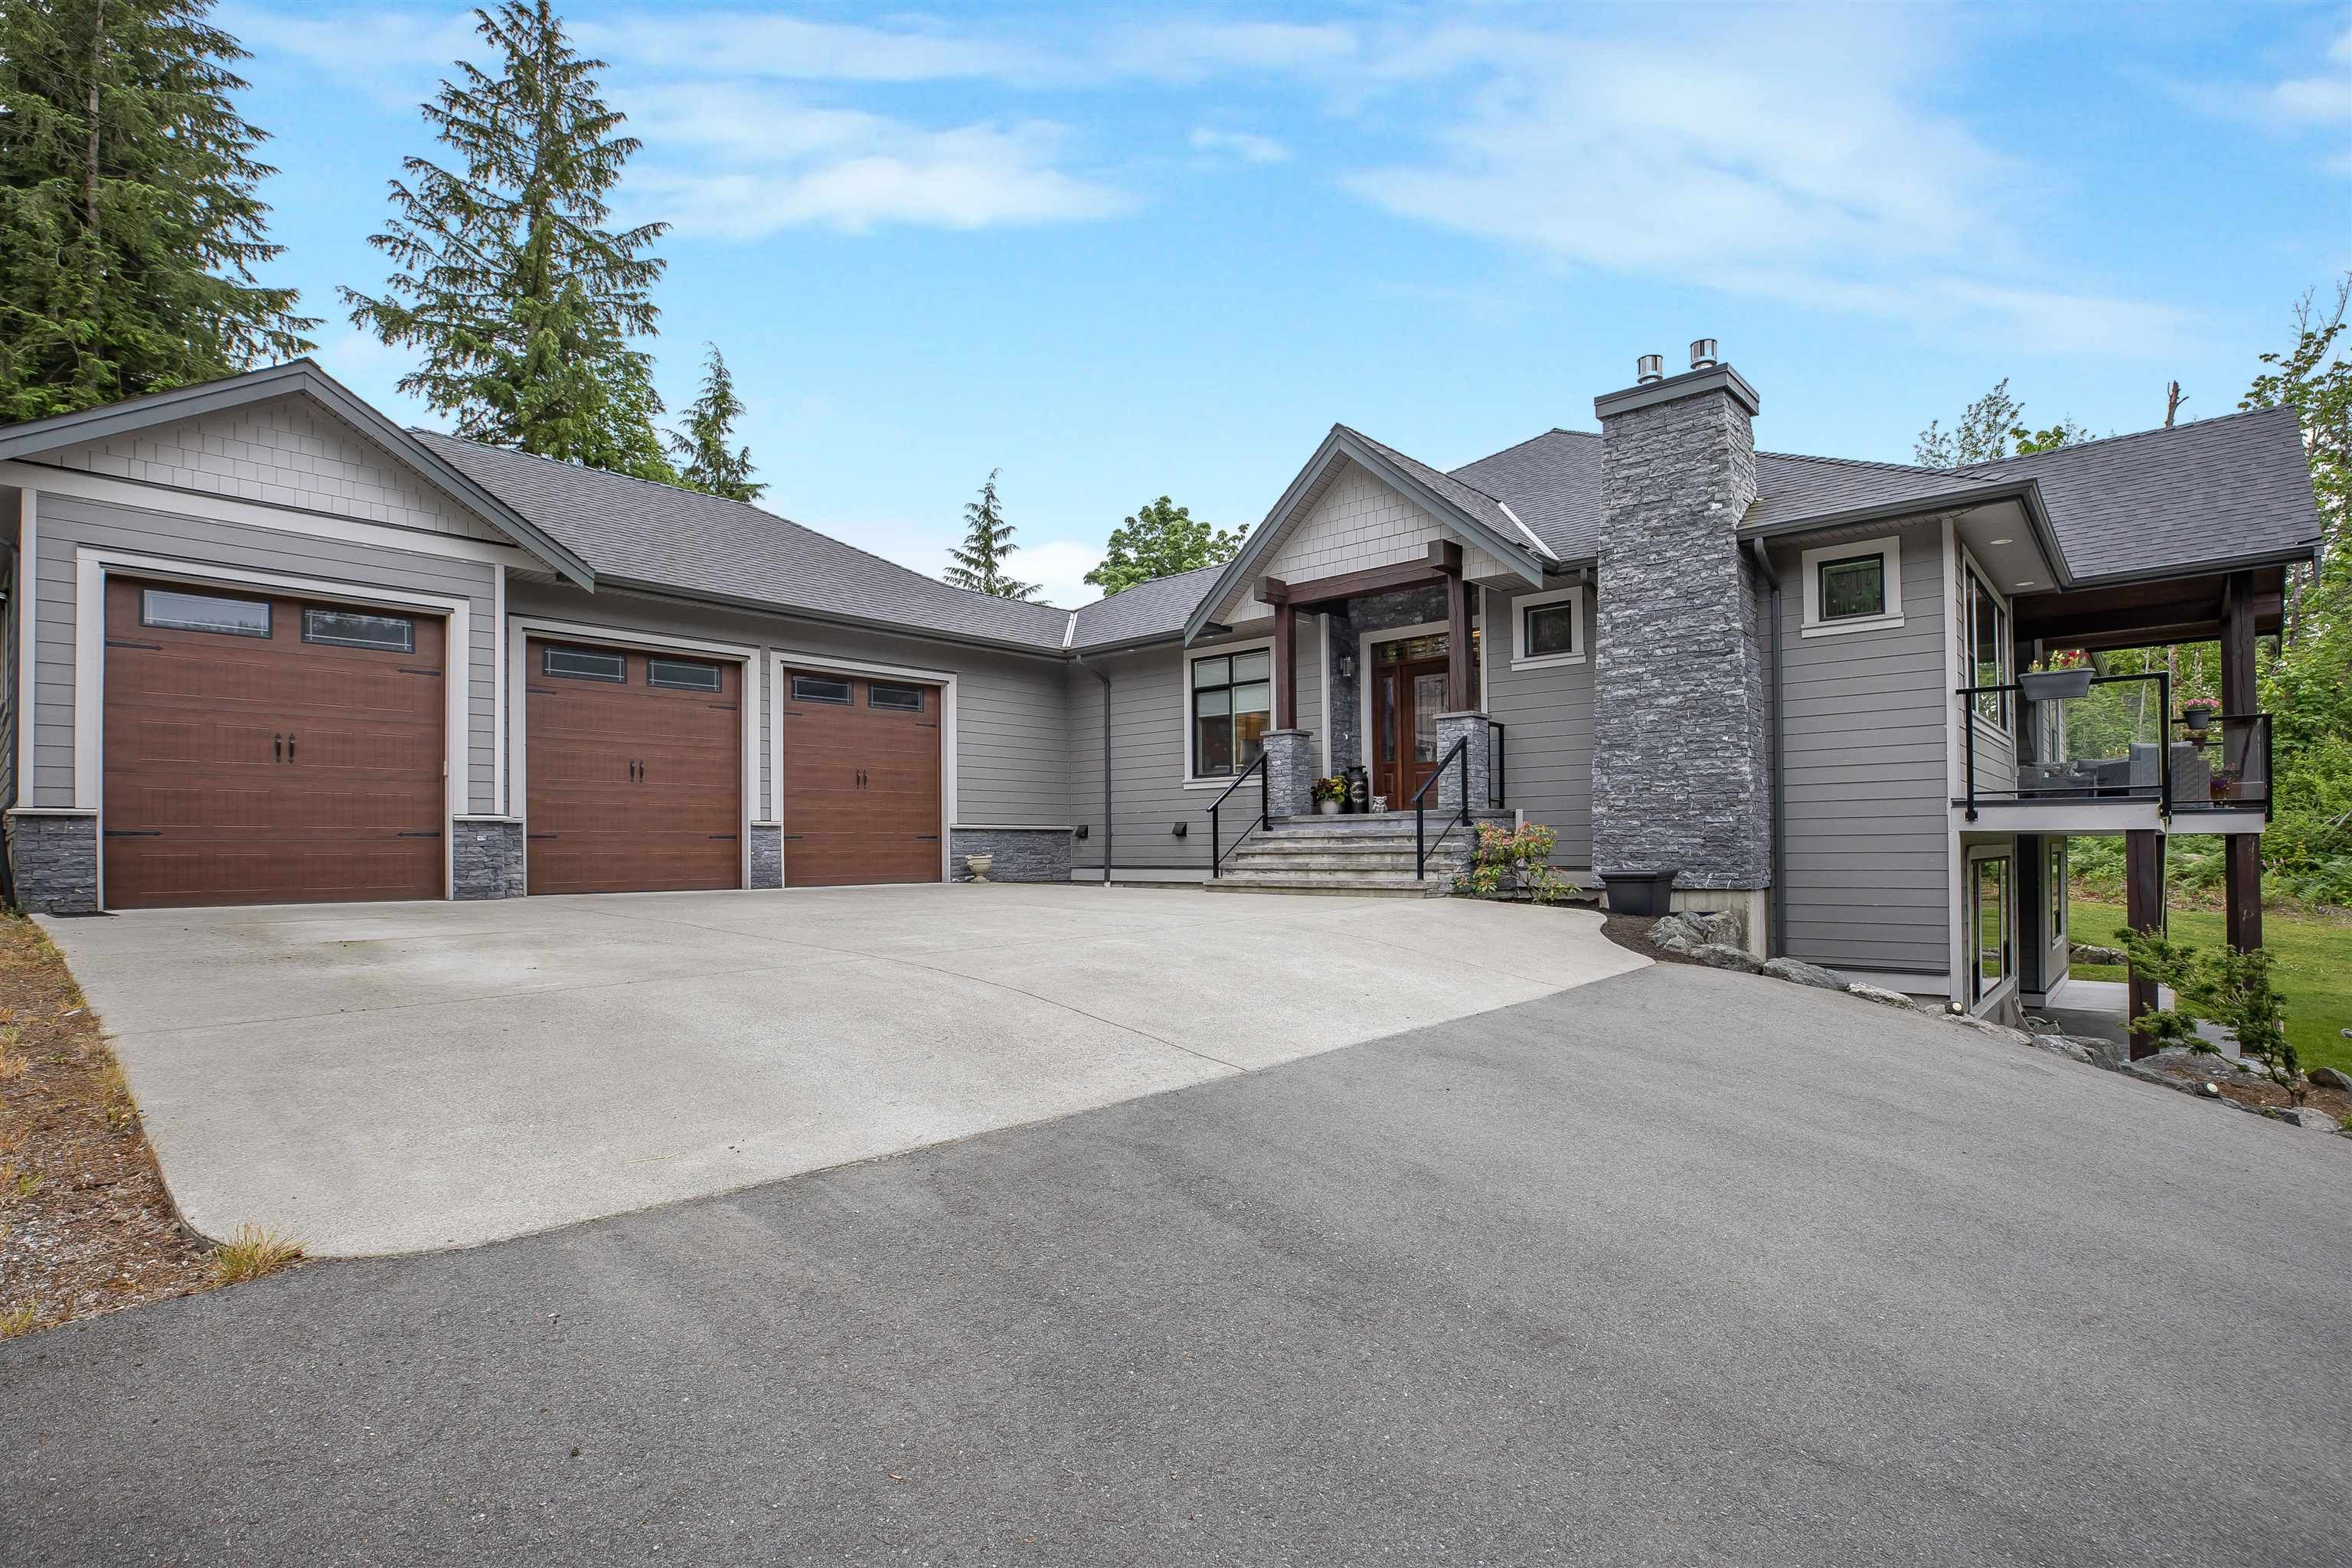 I have sold a property at 33722 DARBYSHIRE DR in Mission
